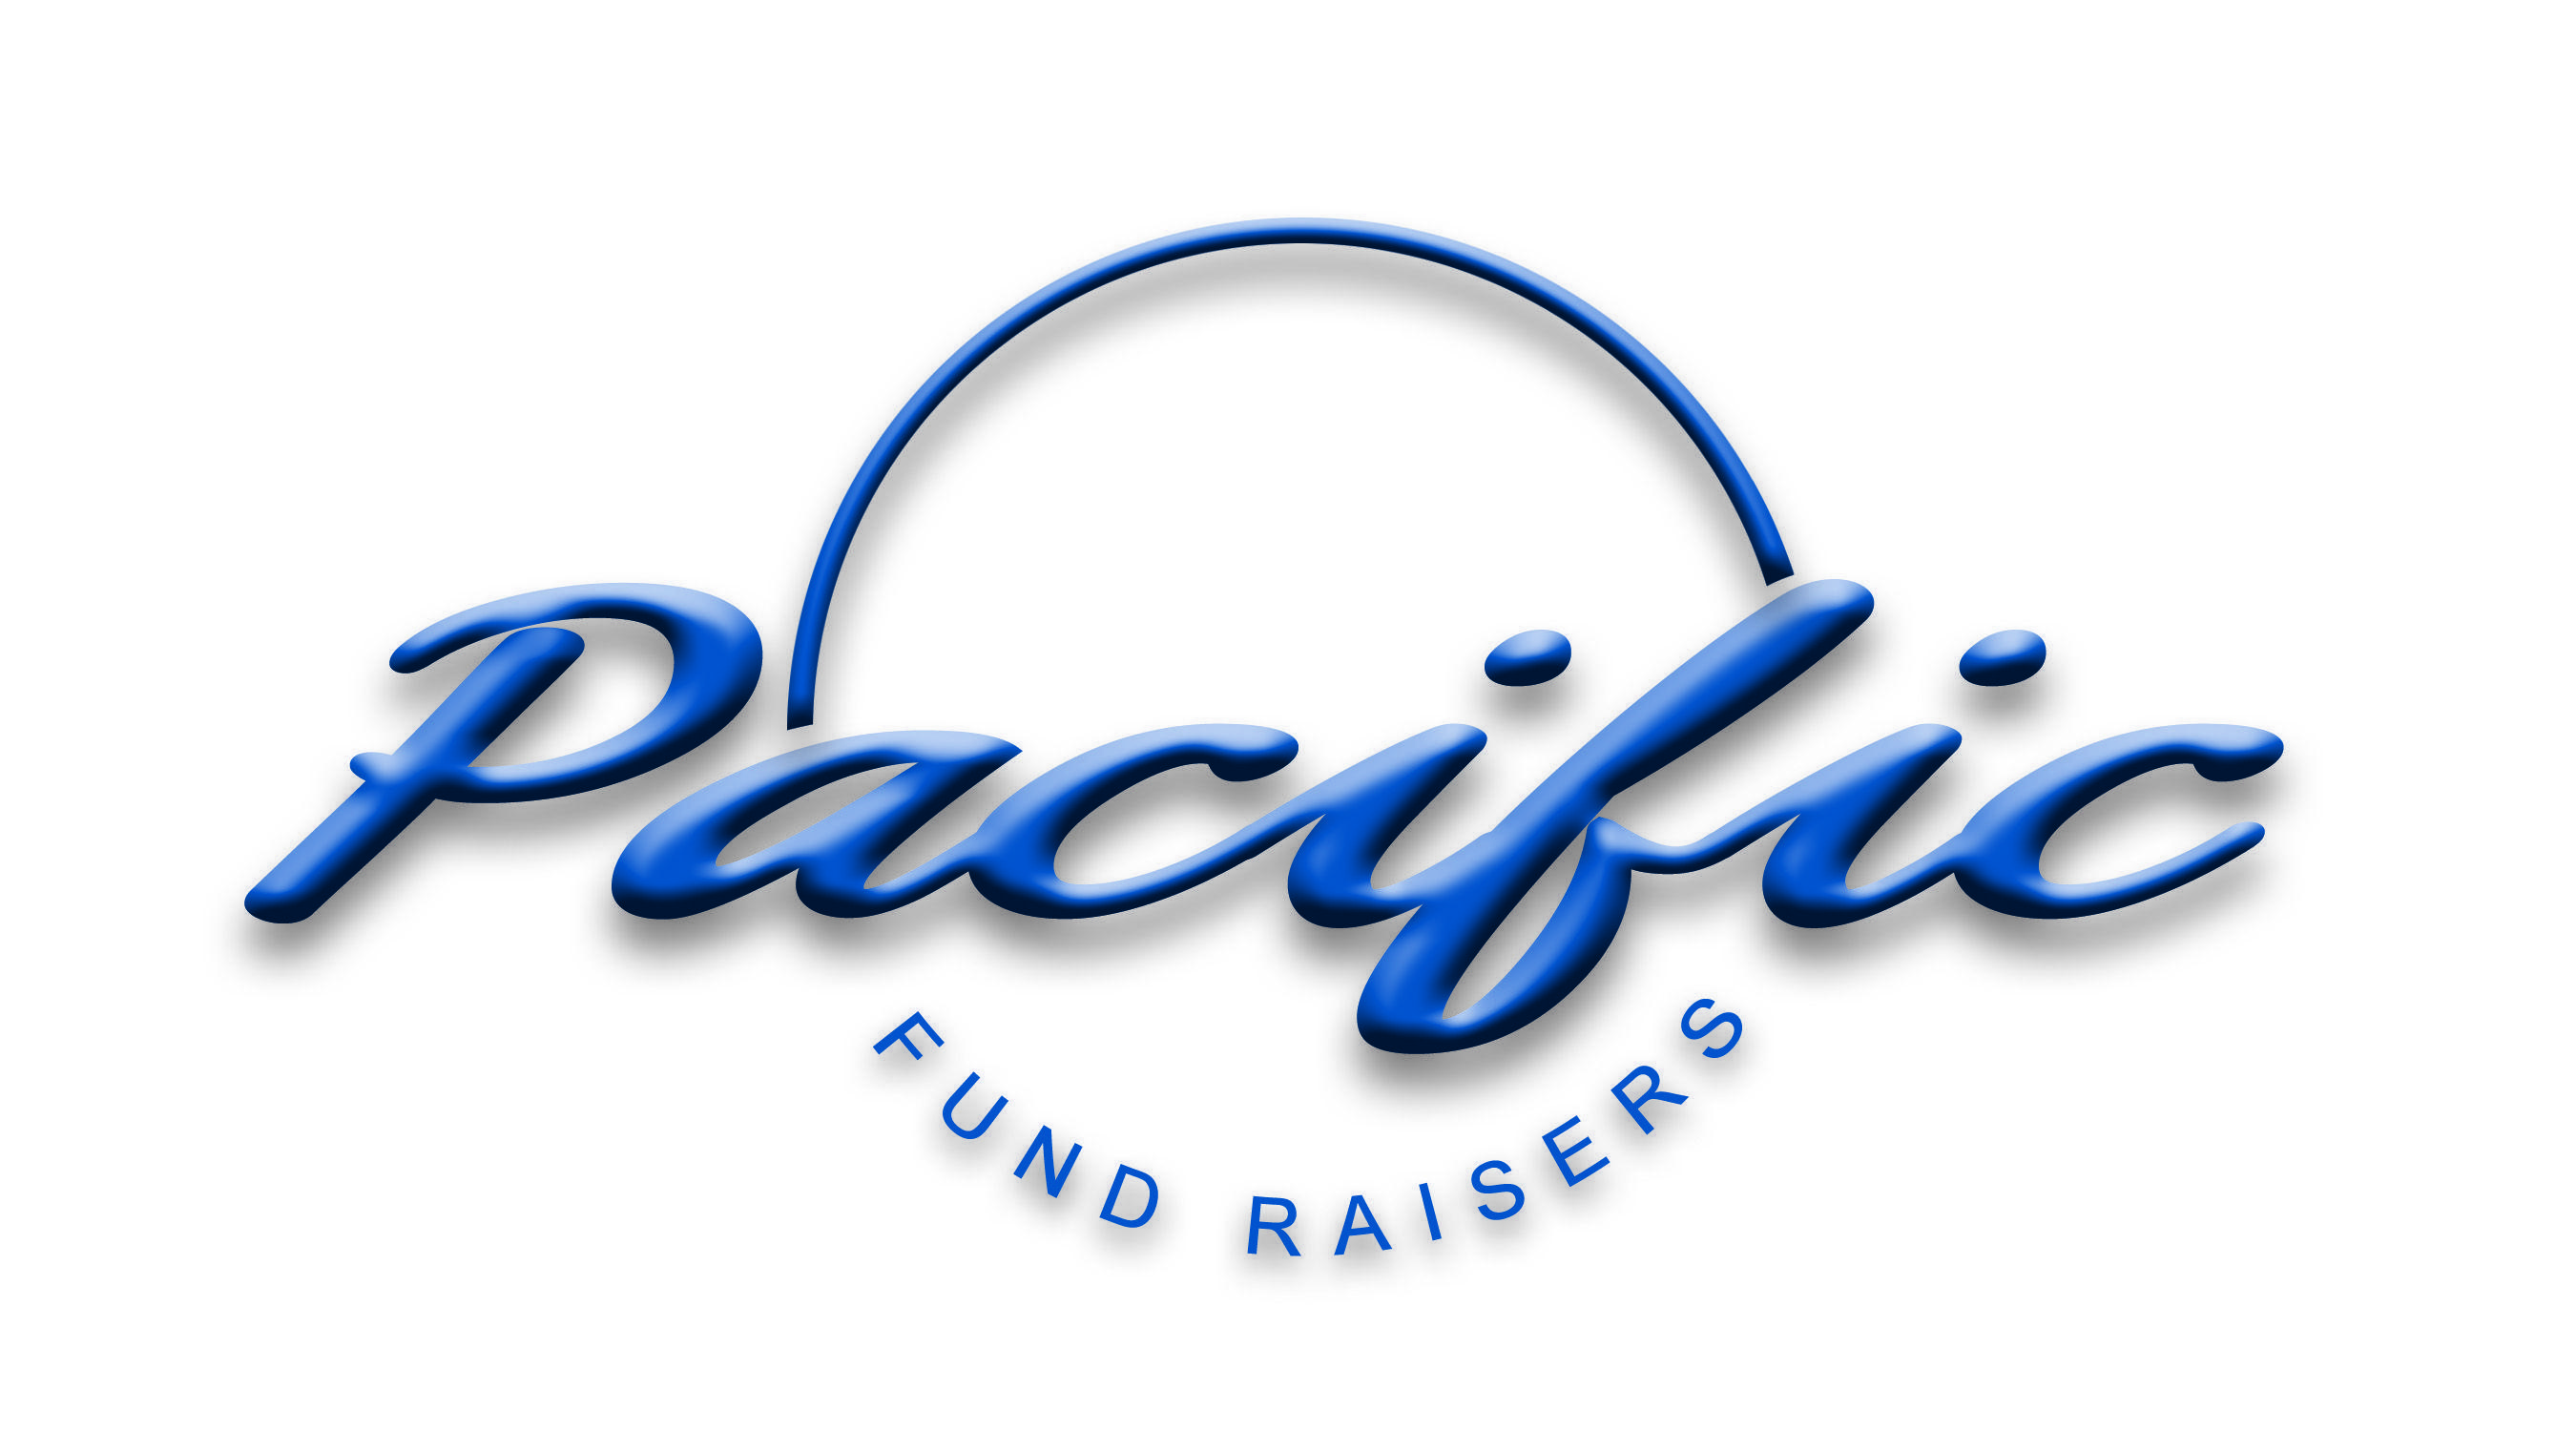 Pacific Logo - Pacific Logo | Free Images at Clker.com - vector clip art online ...